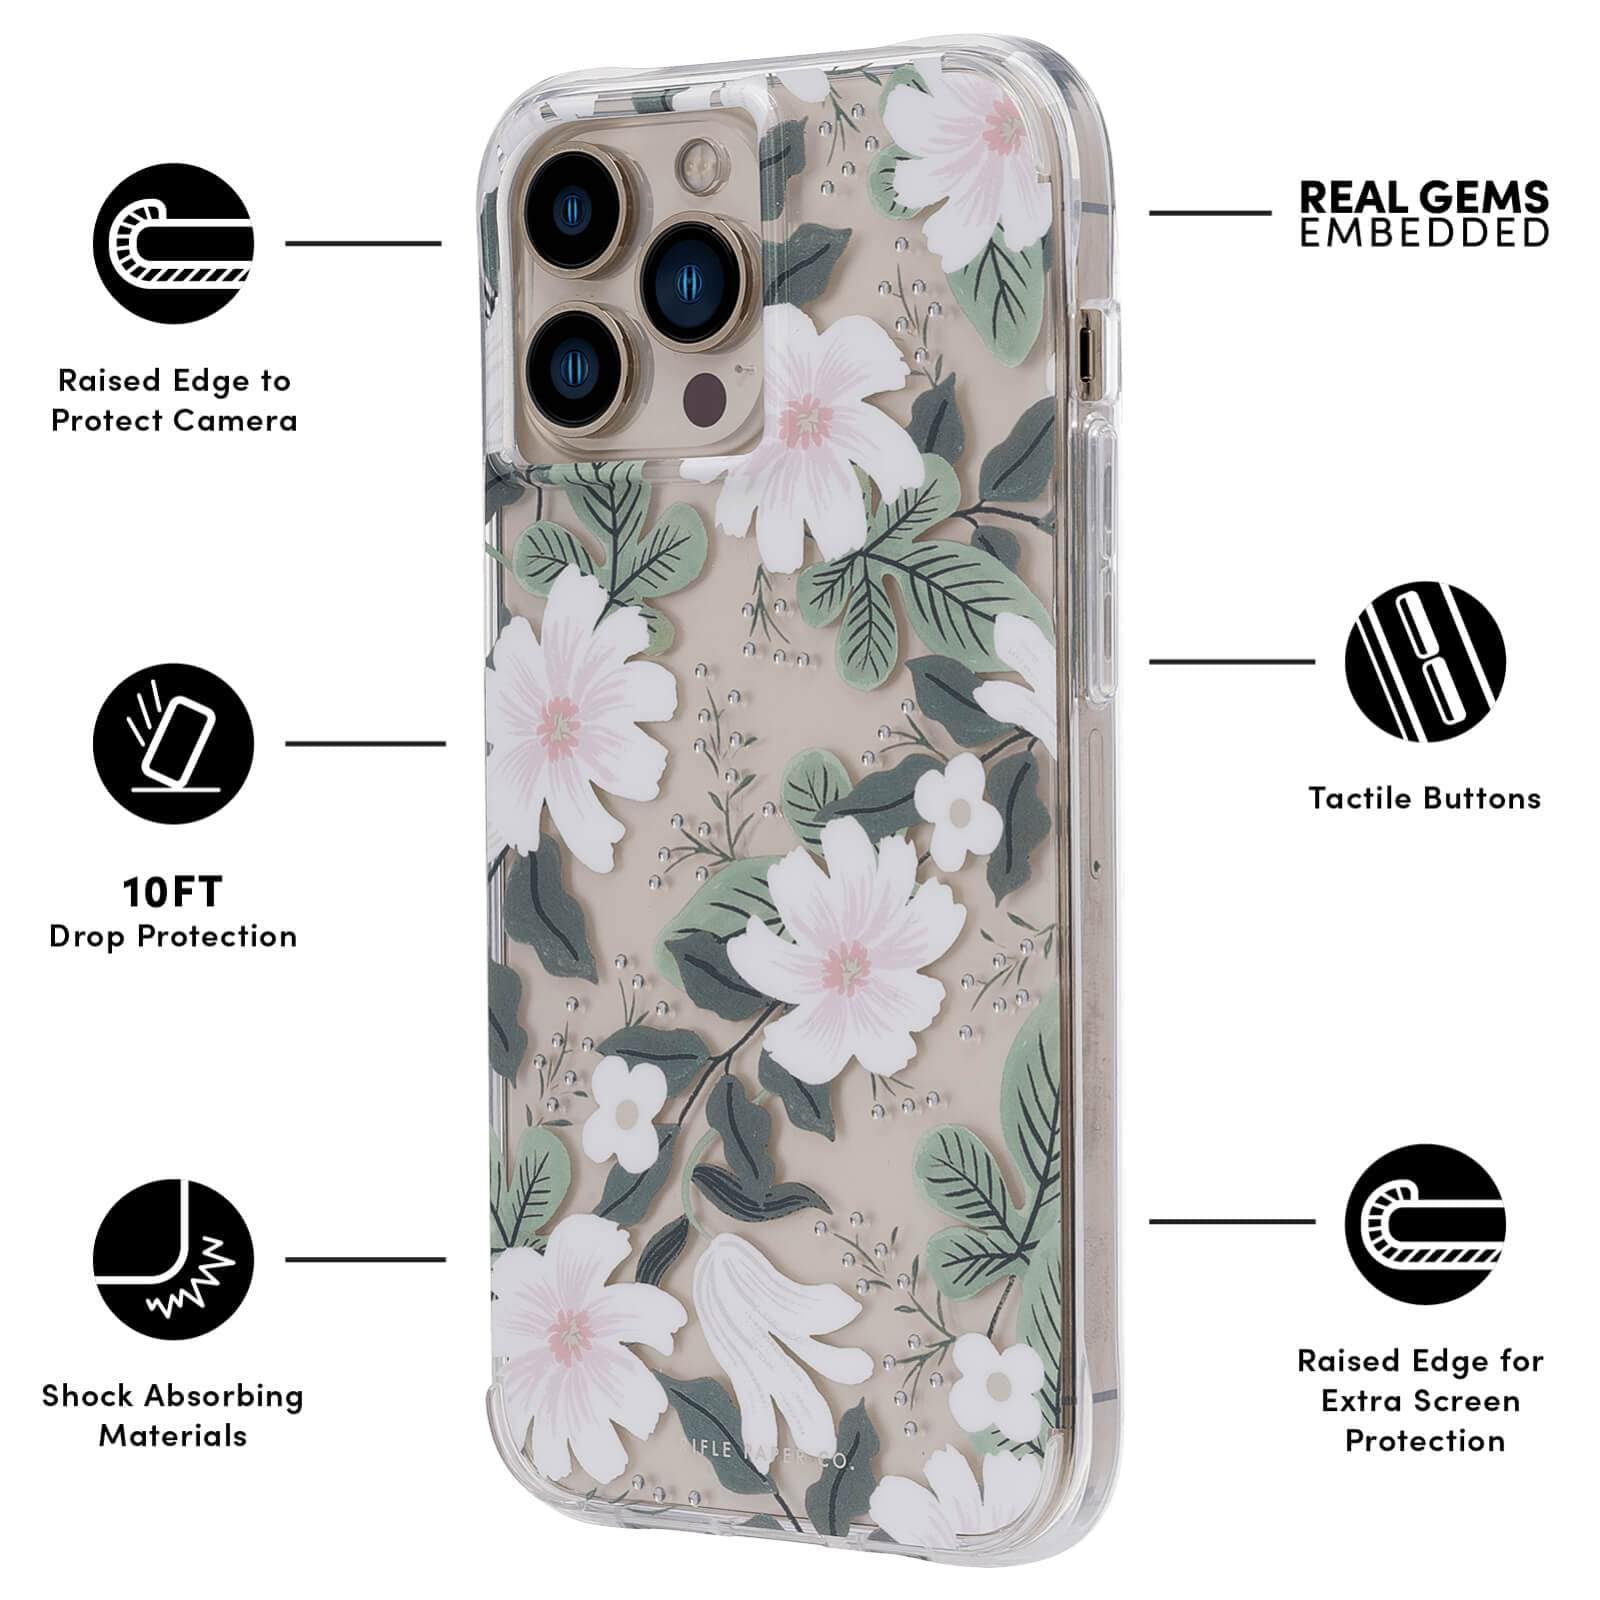 FEATURES: RAISED EDGE TO PROTECT CAMERA, 10 FT DROP PROTECTION, SHOCK ABSORBING MATERIALS, RIFLE PAPER CO. CLASSIC PRINT, TACTILE BUTTONS, RAISED EDGE FOR EXTRA SCREEN PROTECTION. COLOR::WILLOW